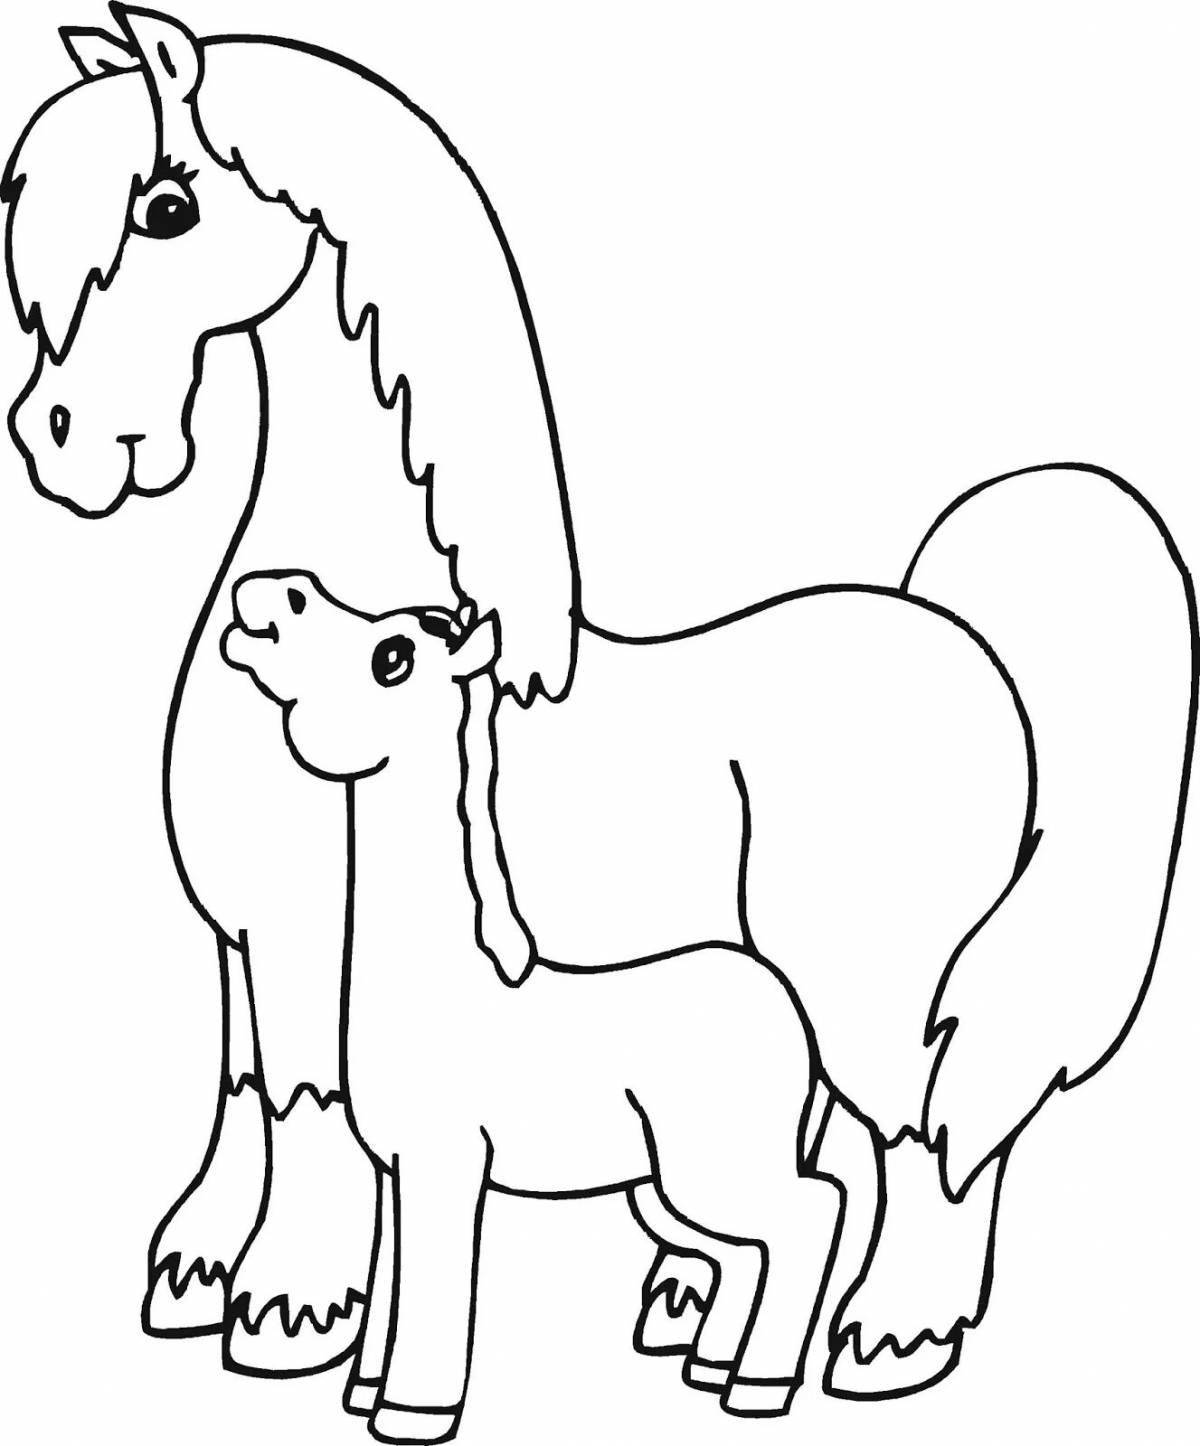 Adorable horse coloring page for 2-3 year olds